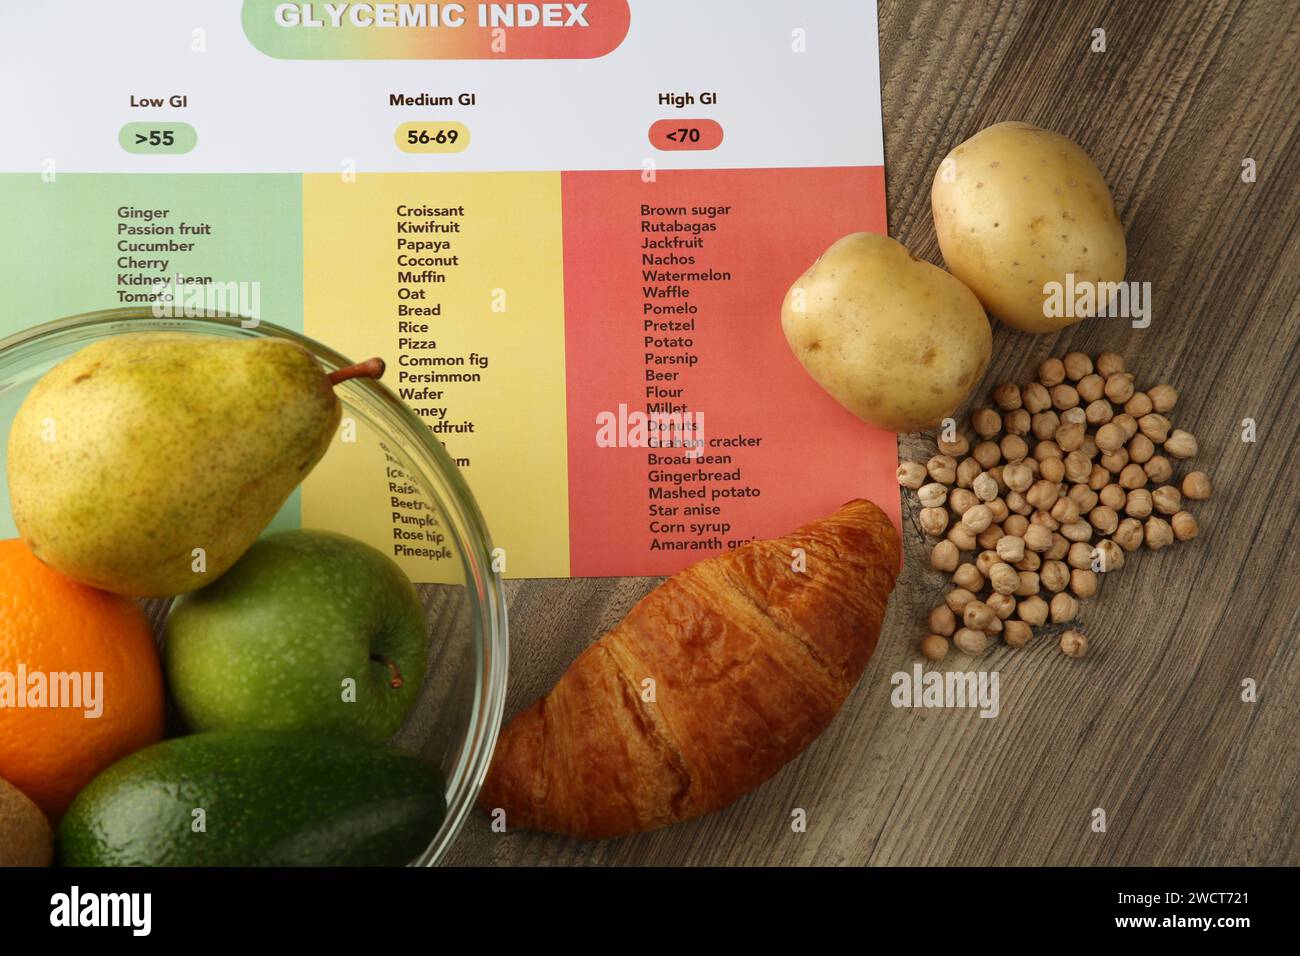 Glycemic index chart and different products on wooden table, flat lay Stock Photo